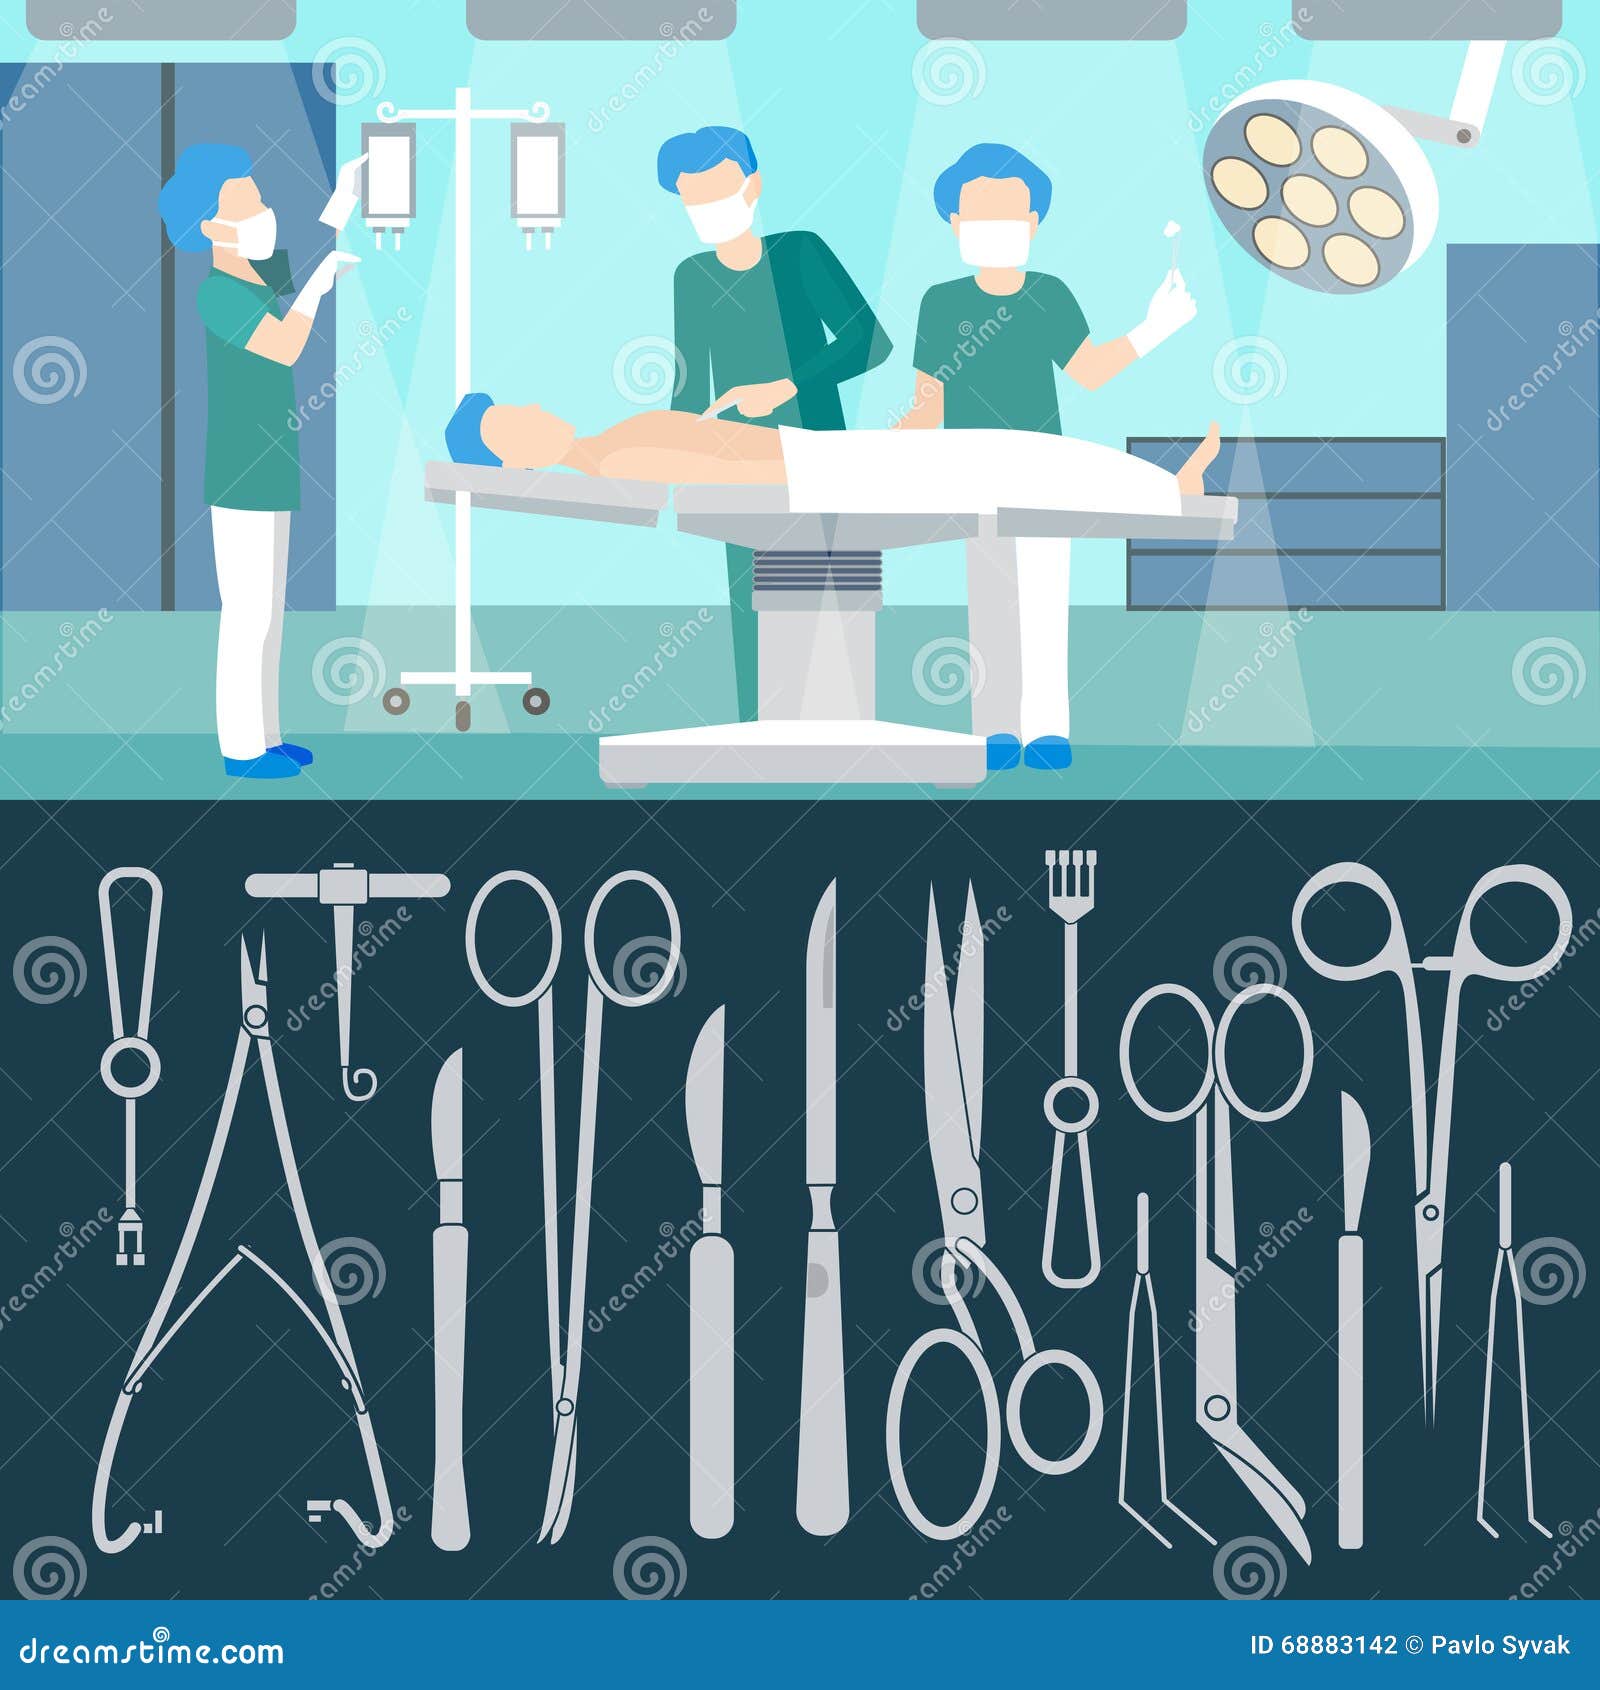 operating room clipart free - photo #43